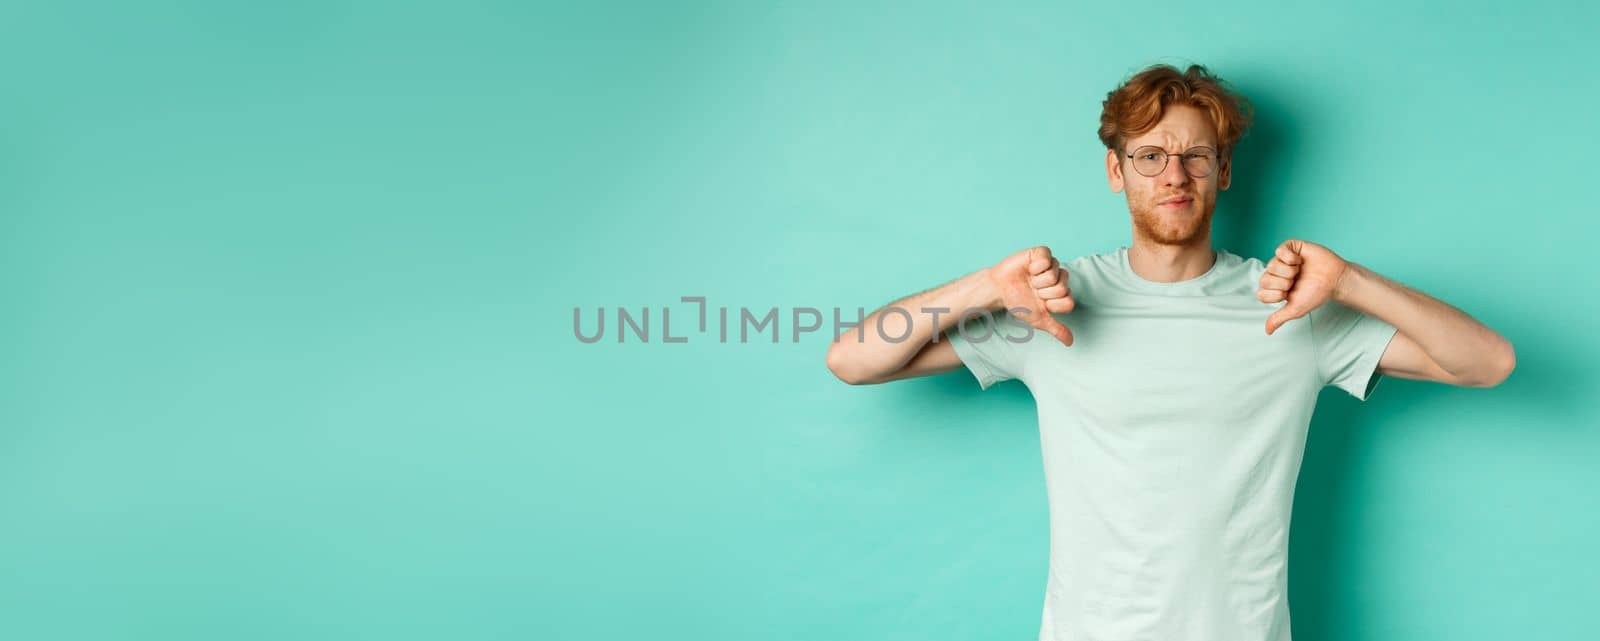 Disappointed caucasian guy with red messy hair and glasses showing thumbs down, dislike something, frowning upset and displeased, standing over mint background.